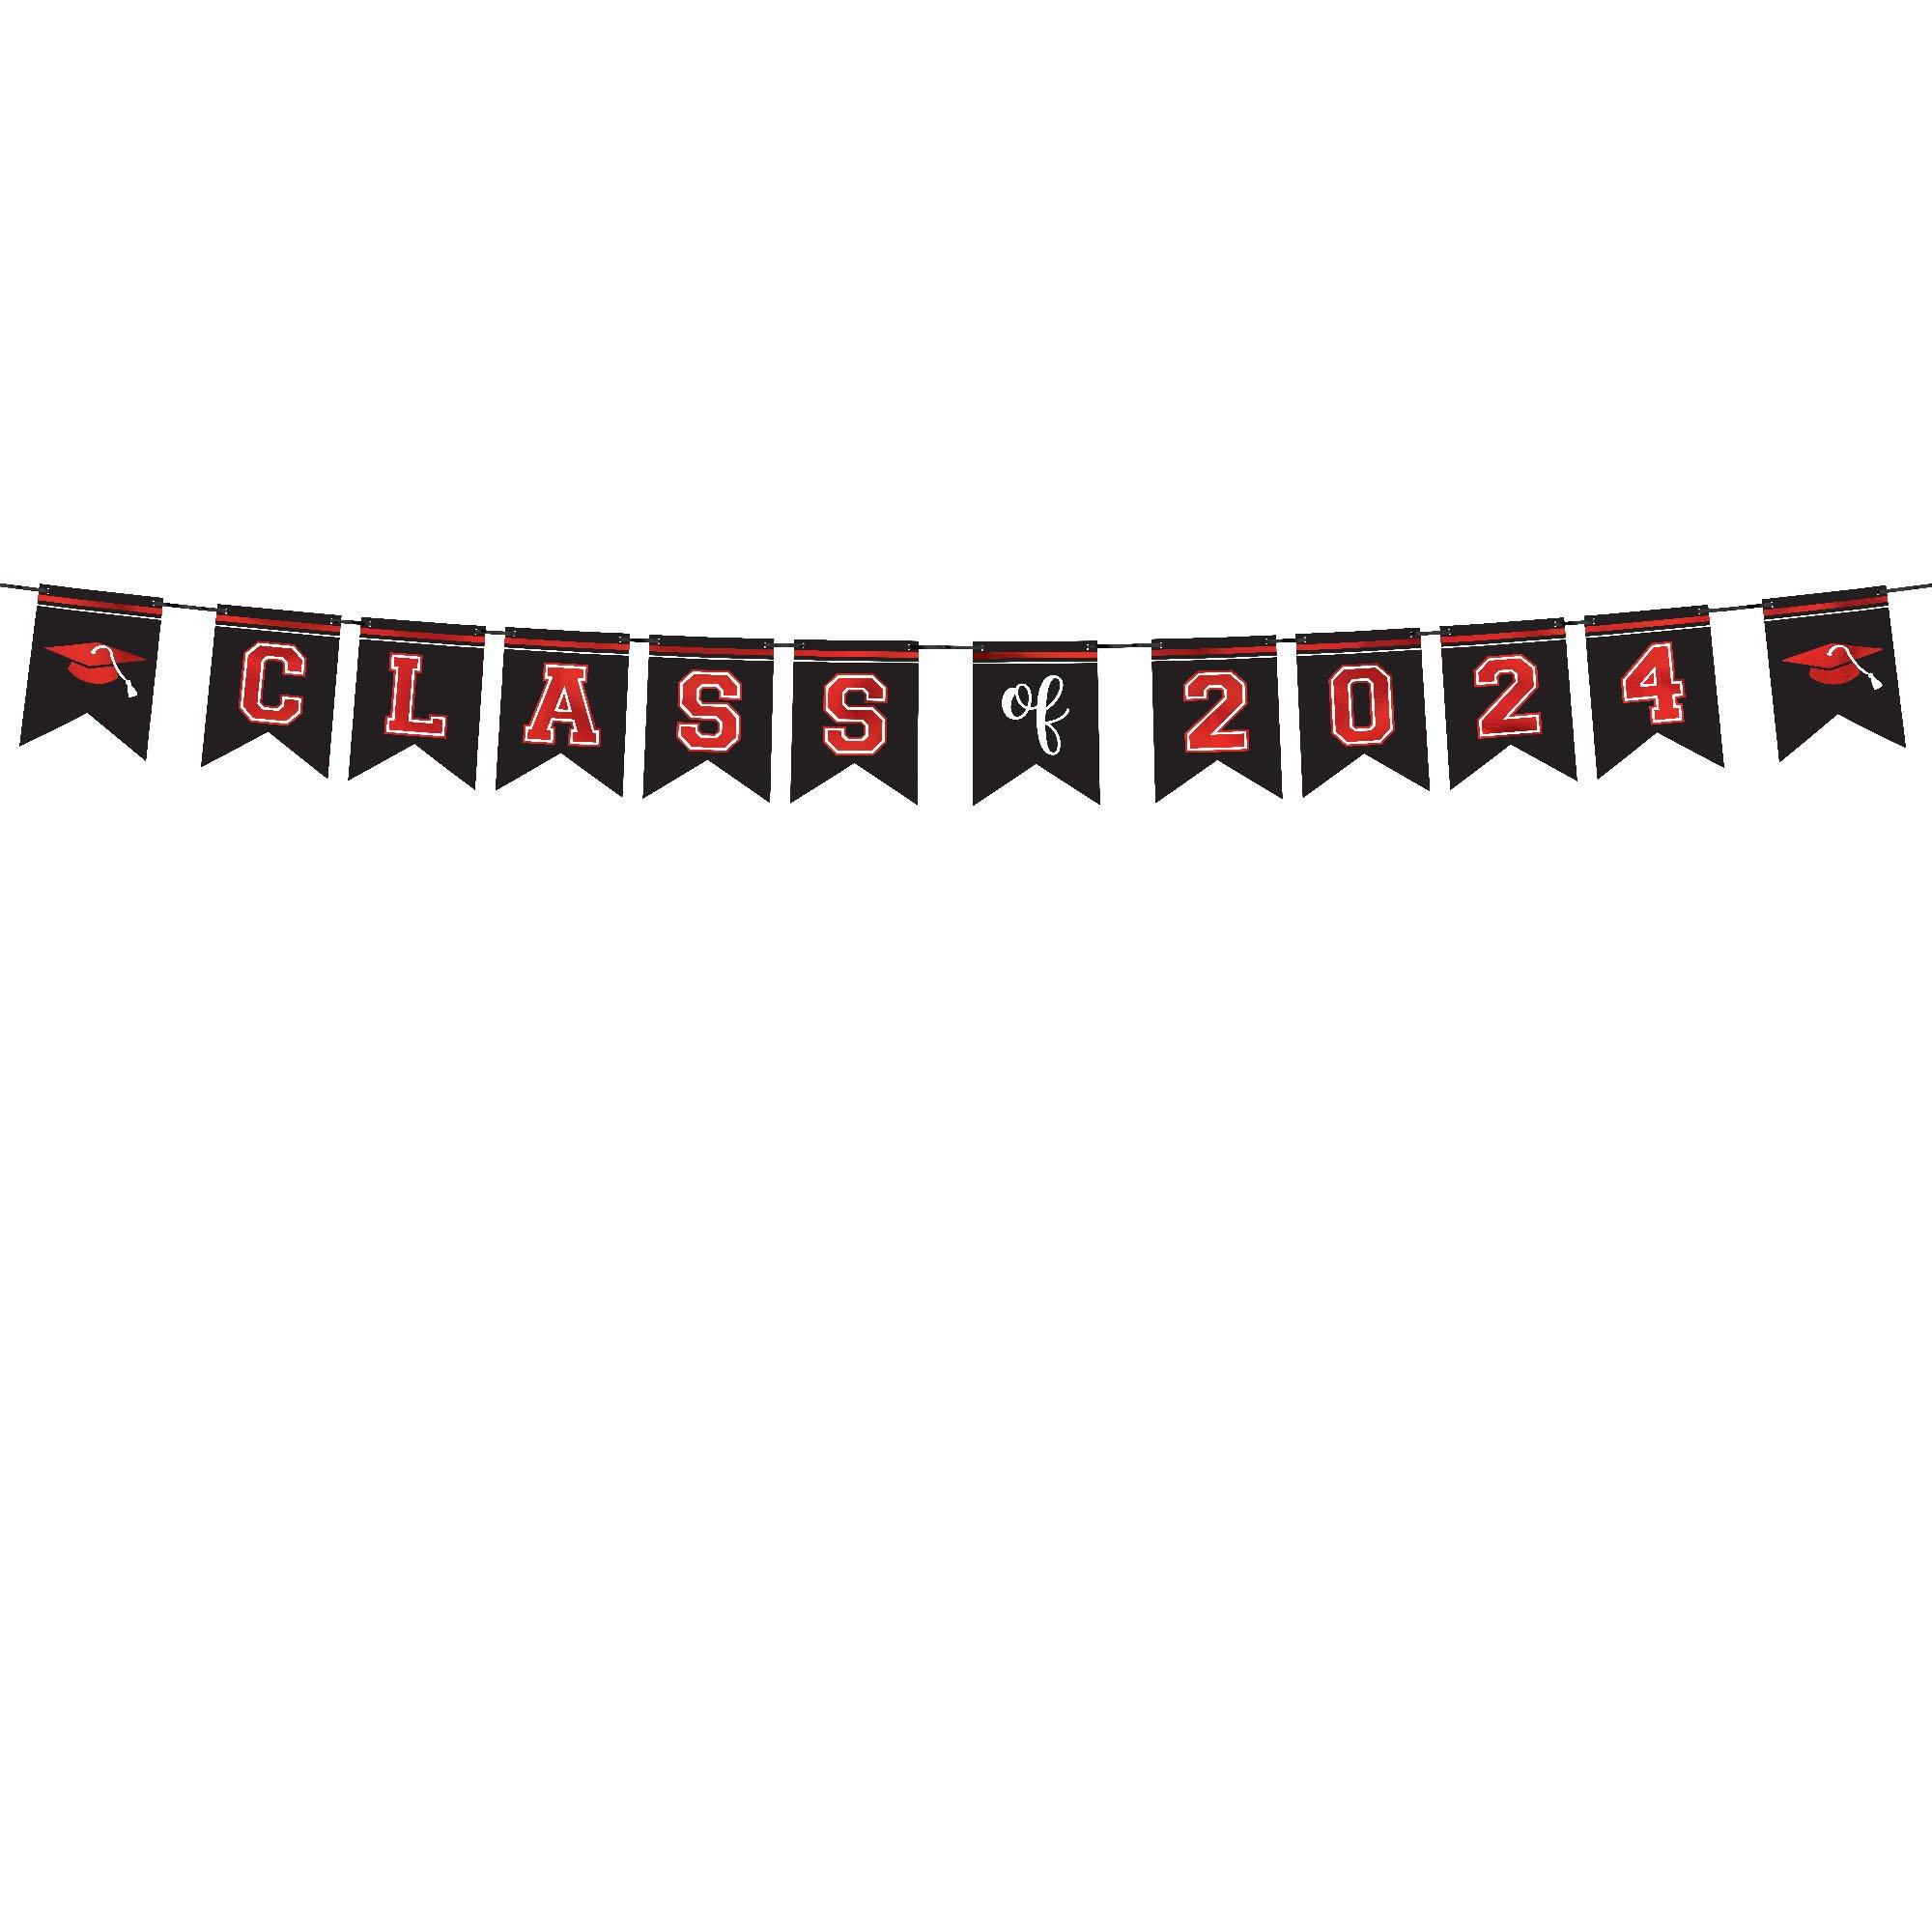 Class of 2023 Graduation Cardstock Pennant Banner, 12ft